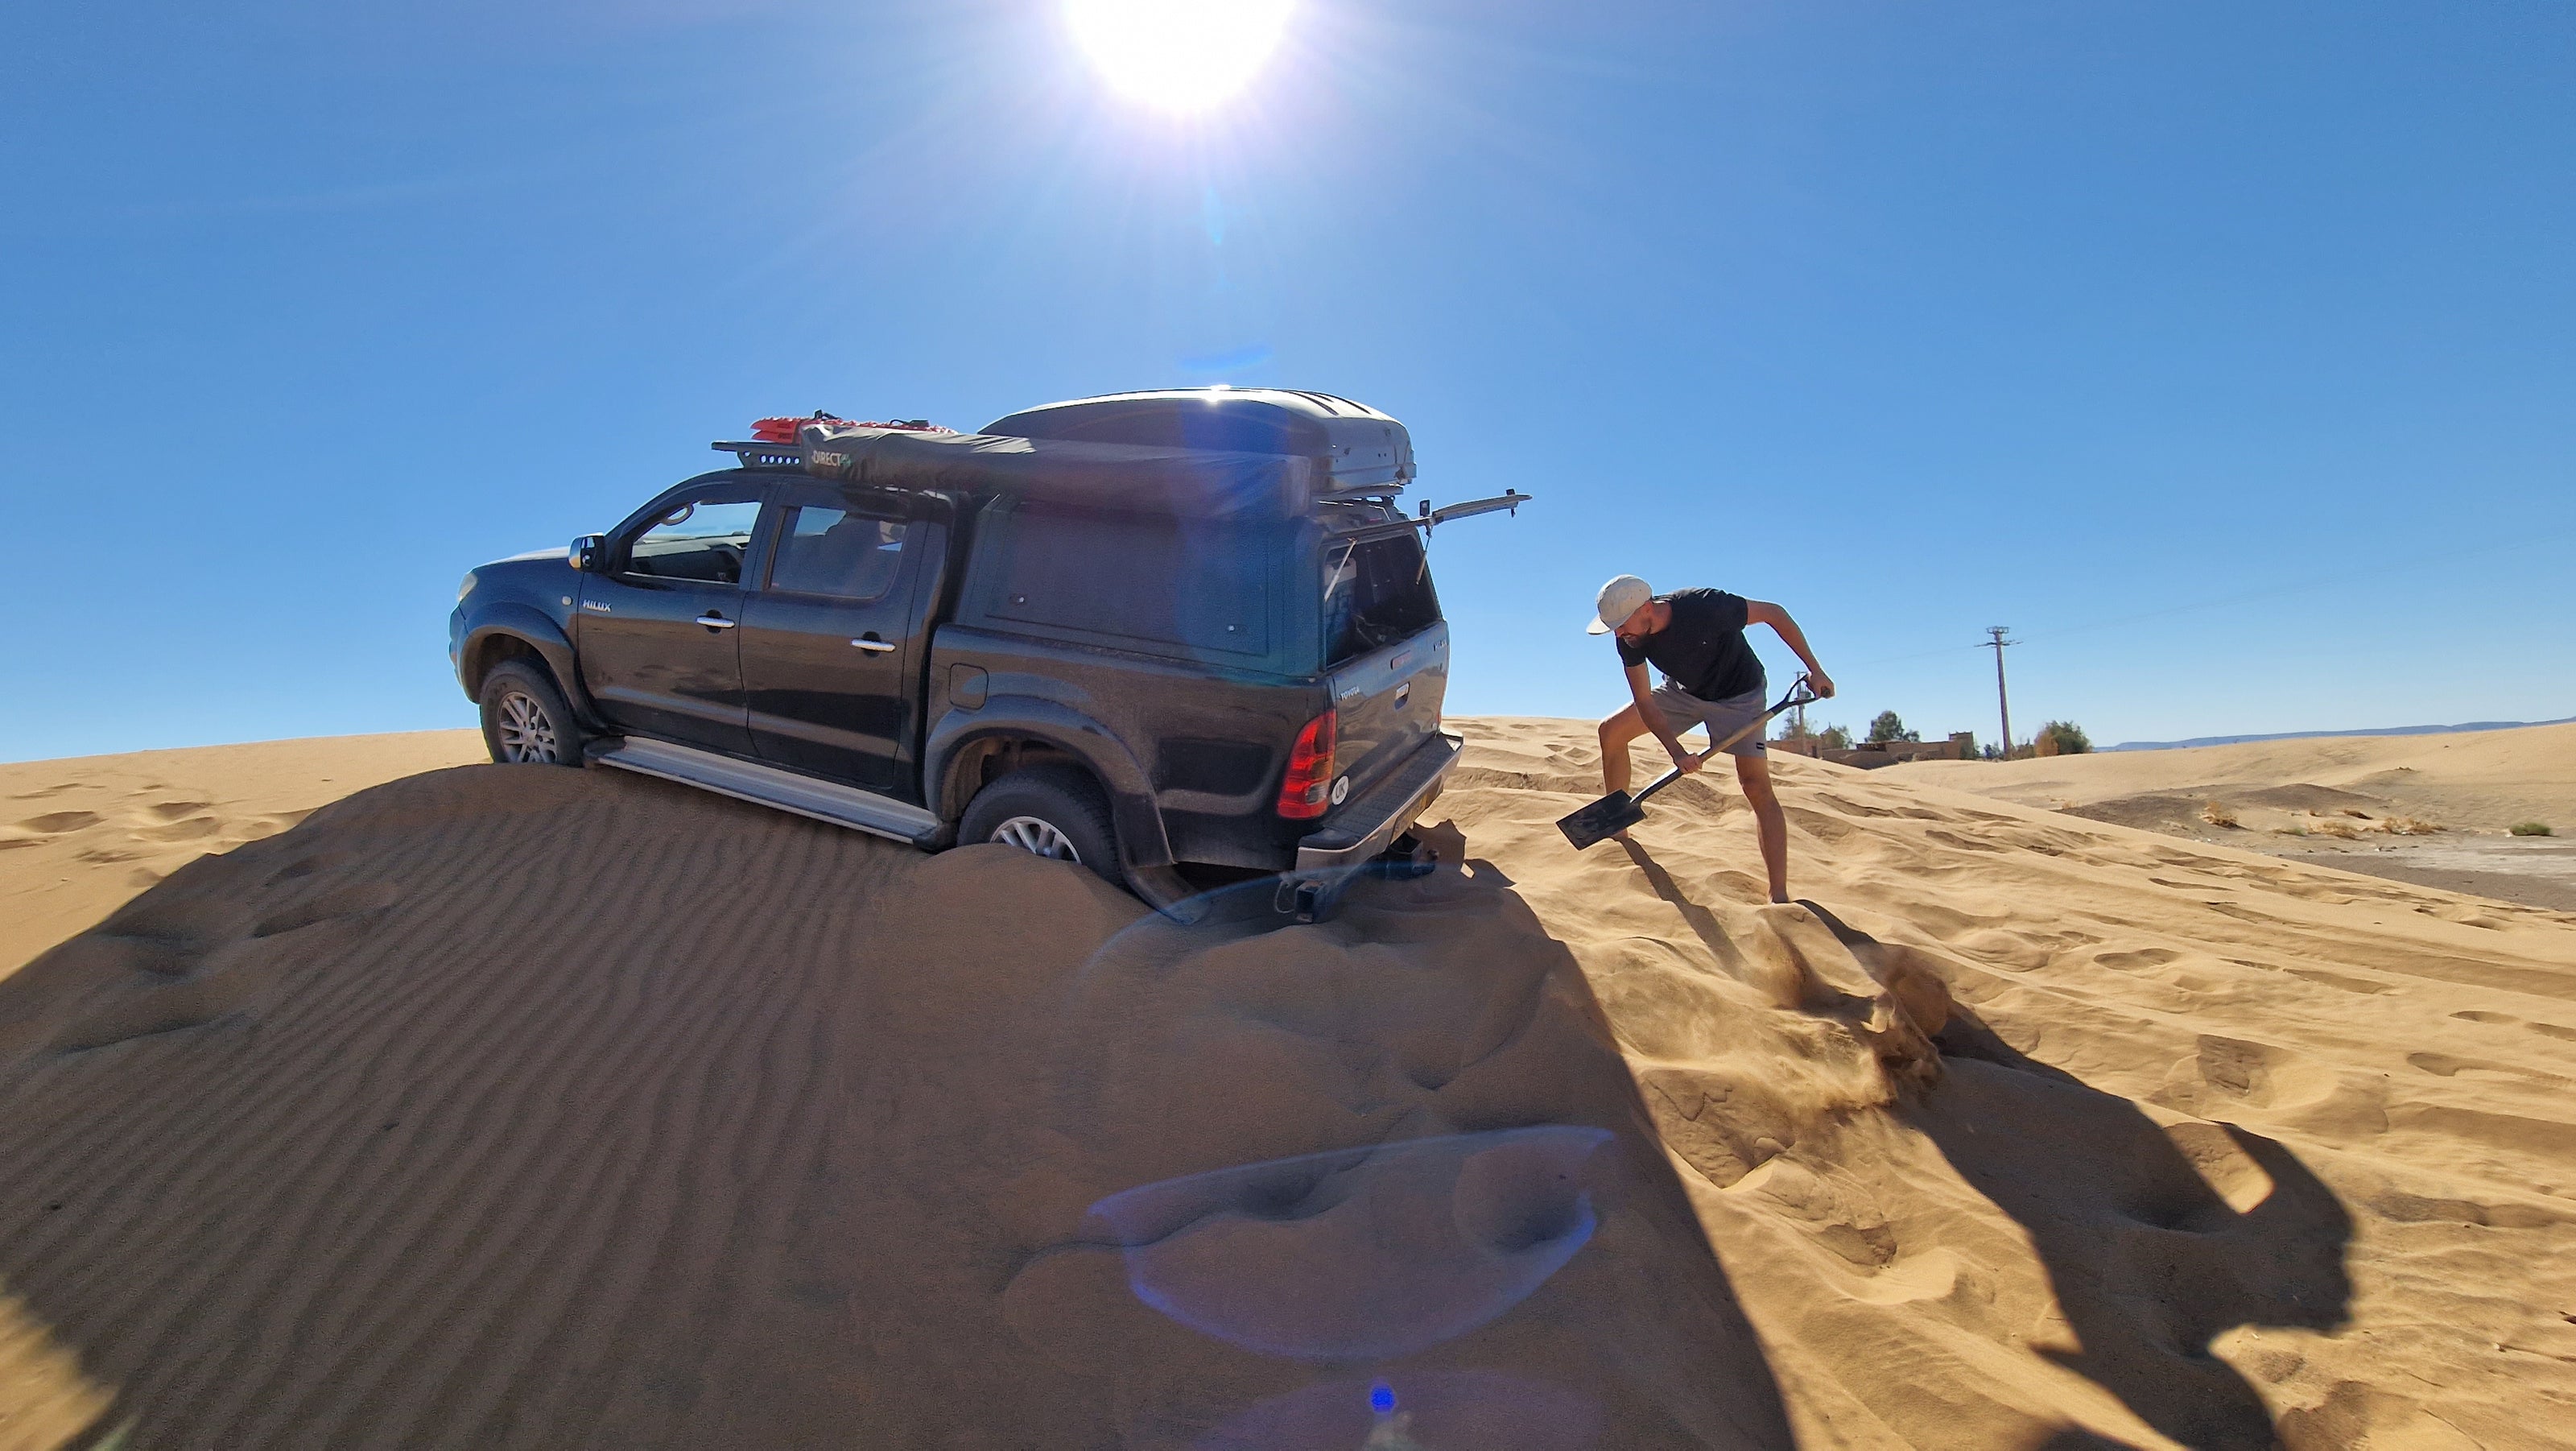 Photo of 2 people trying to dig out a Toyota Hilux pickup truck from the Moroccan desert.